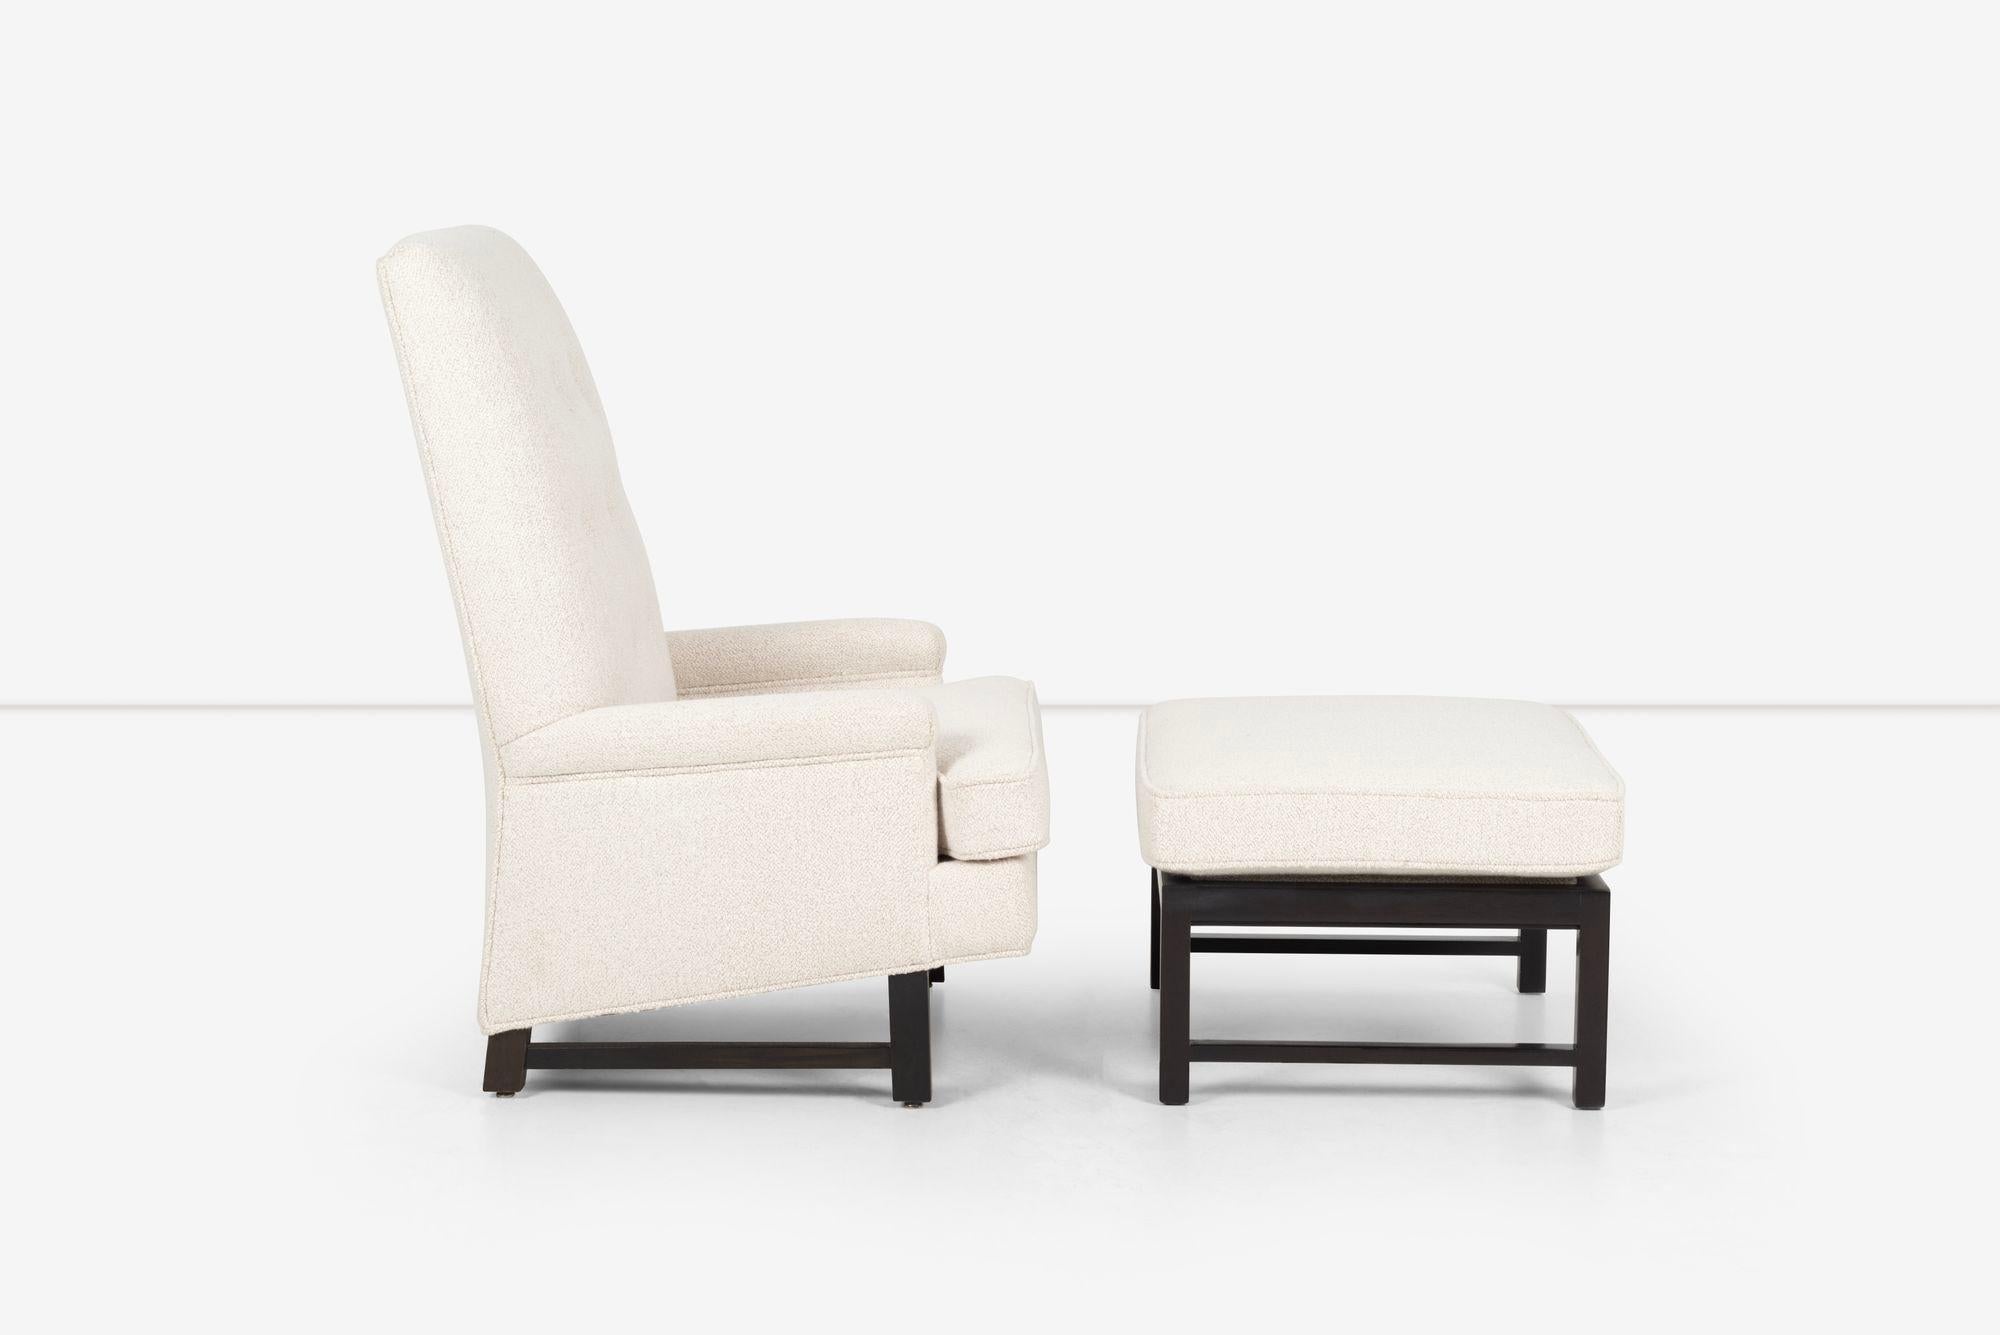 Edward Wormley for Dunbar lounge chair and ottoman, high-back lounge features tufted buttons with solid walnut legs, reupholstered with Great Plains nubby cotton fabric.
Gold 